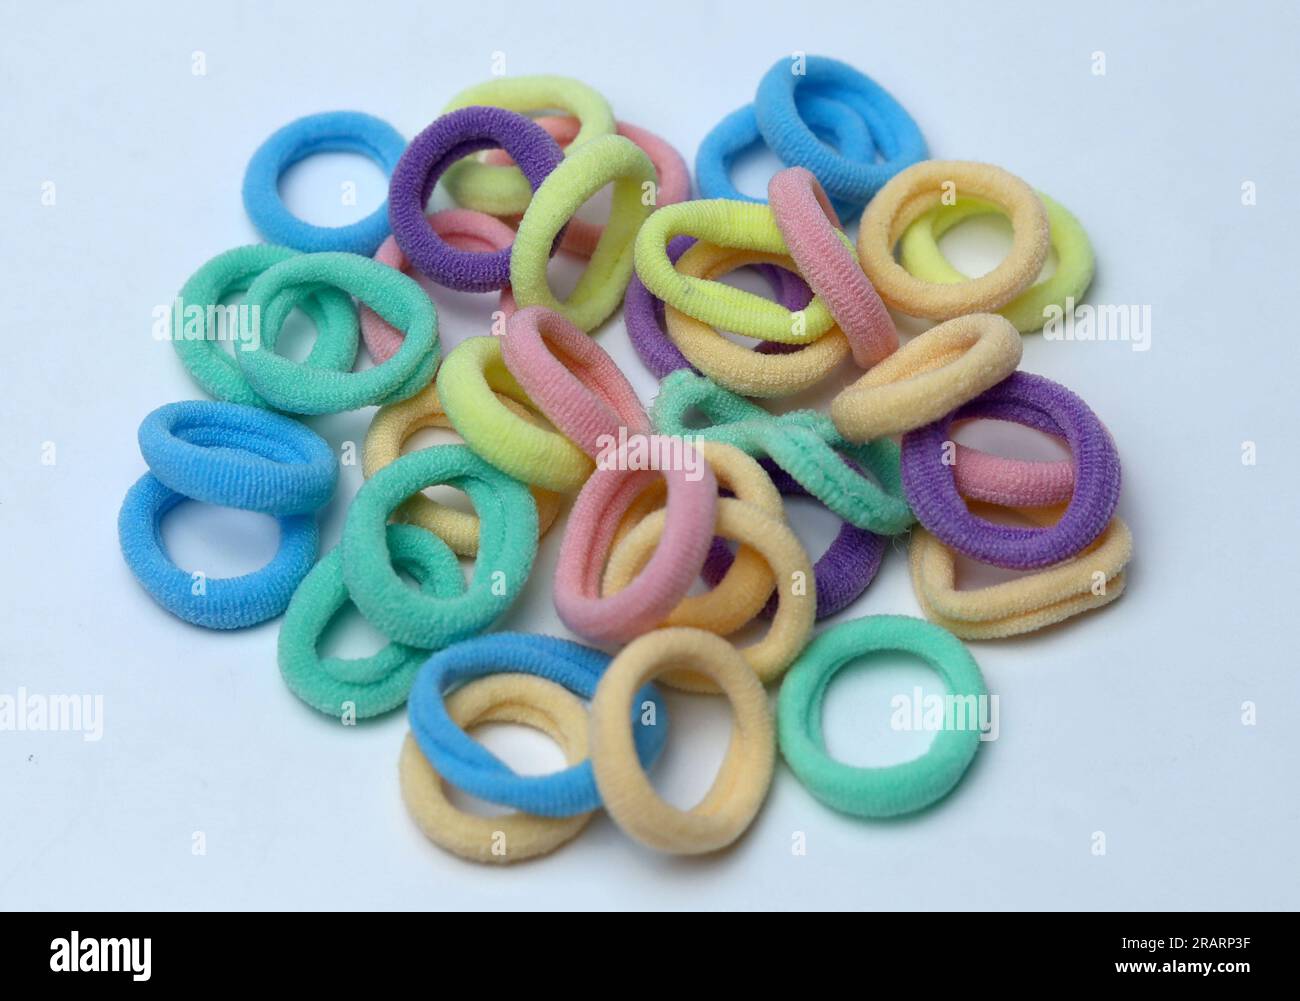 hair multicolored rubber bands or hair tie isolated on white background Stock Photo